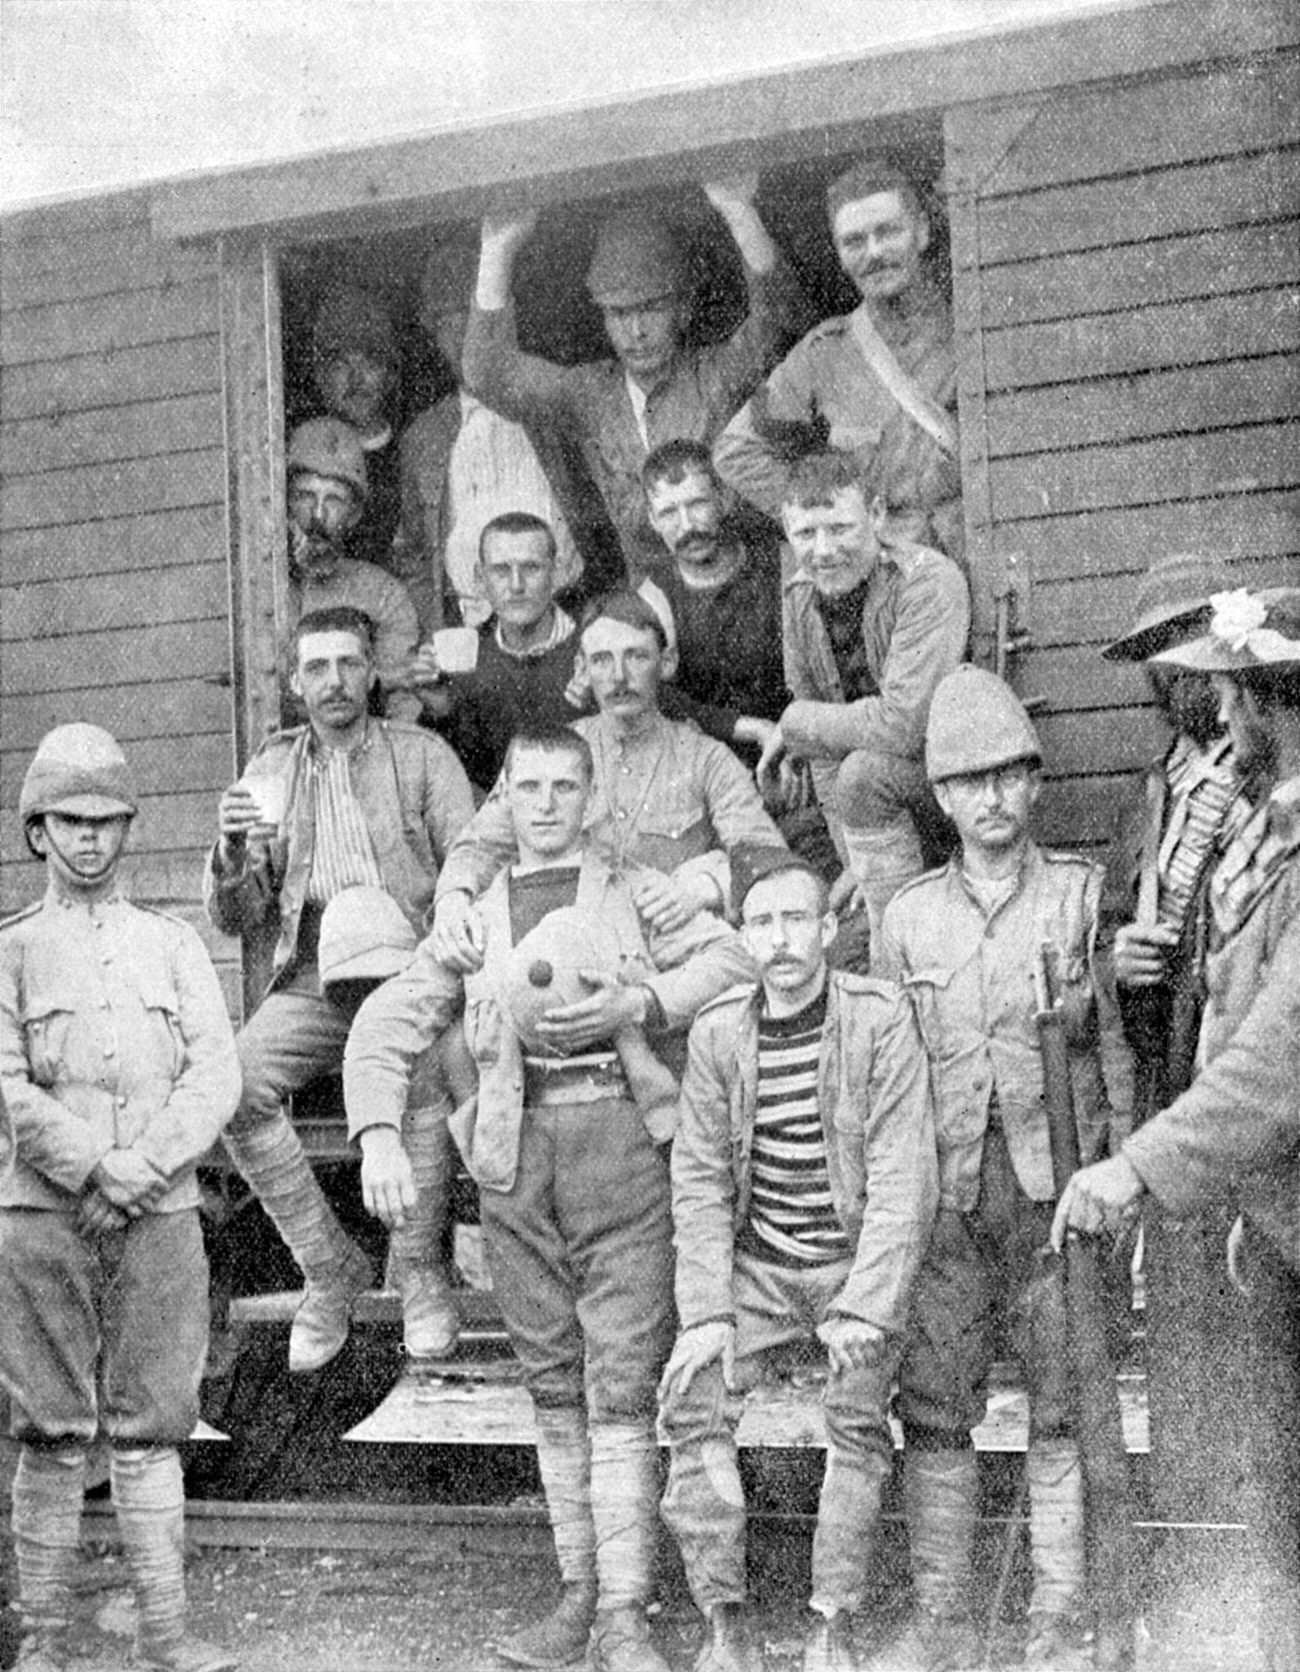 Soldiers of the 18th Hussars on the train to Pretoria, South Africa, Boer War, 1900.